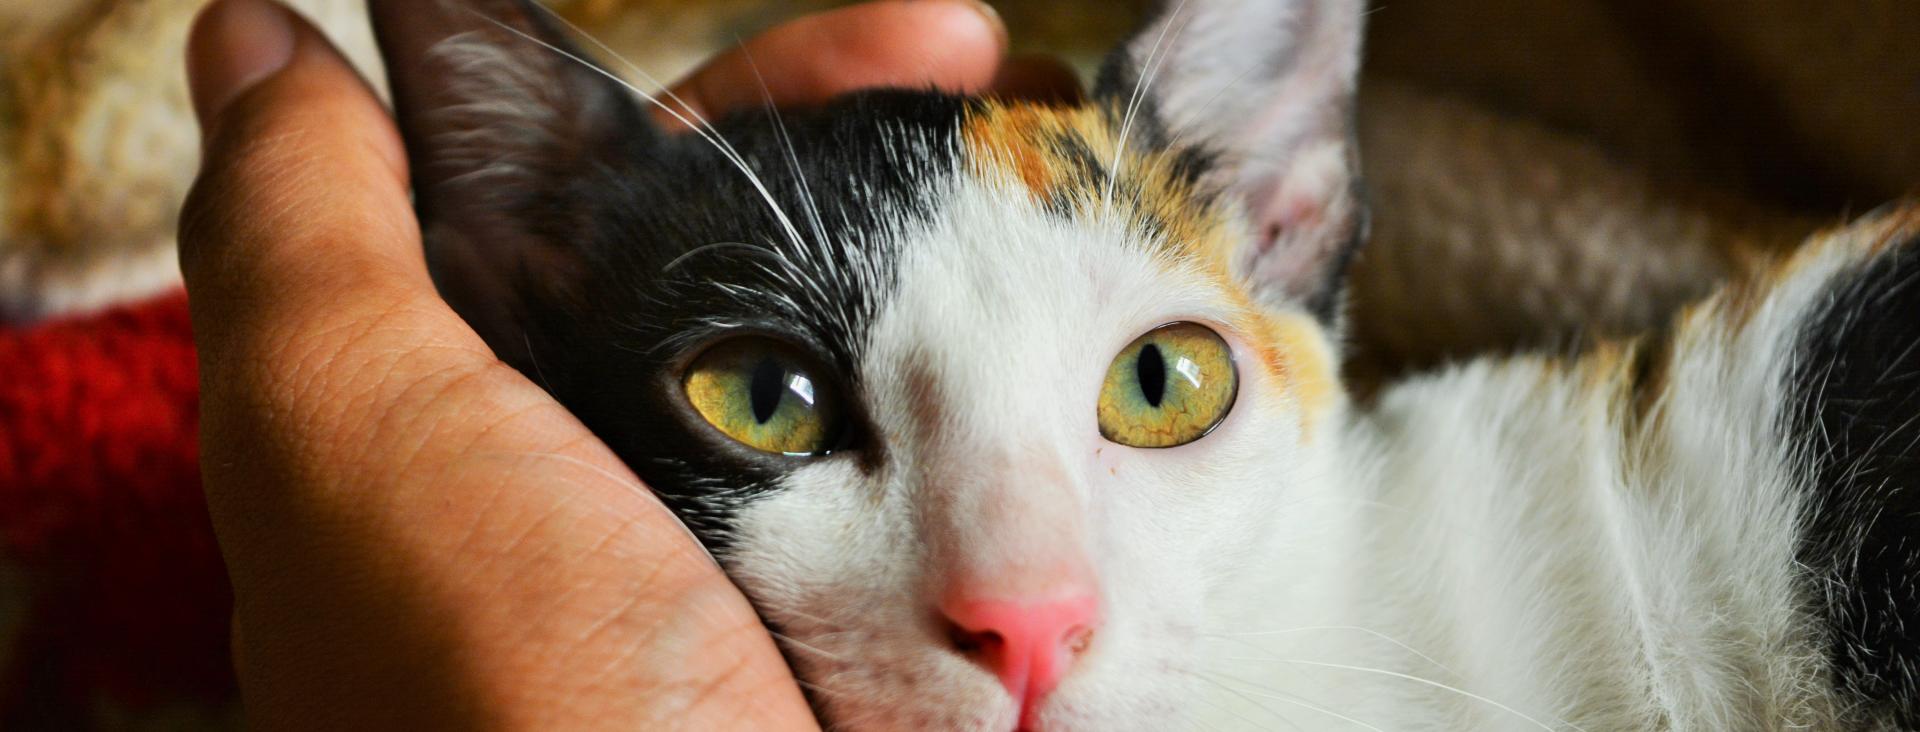 Calico cat head being held by white hand